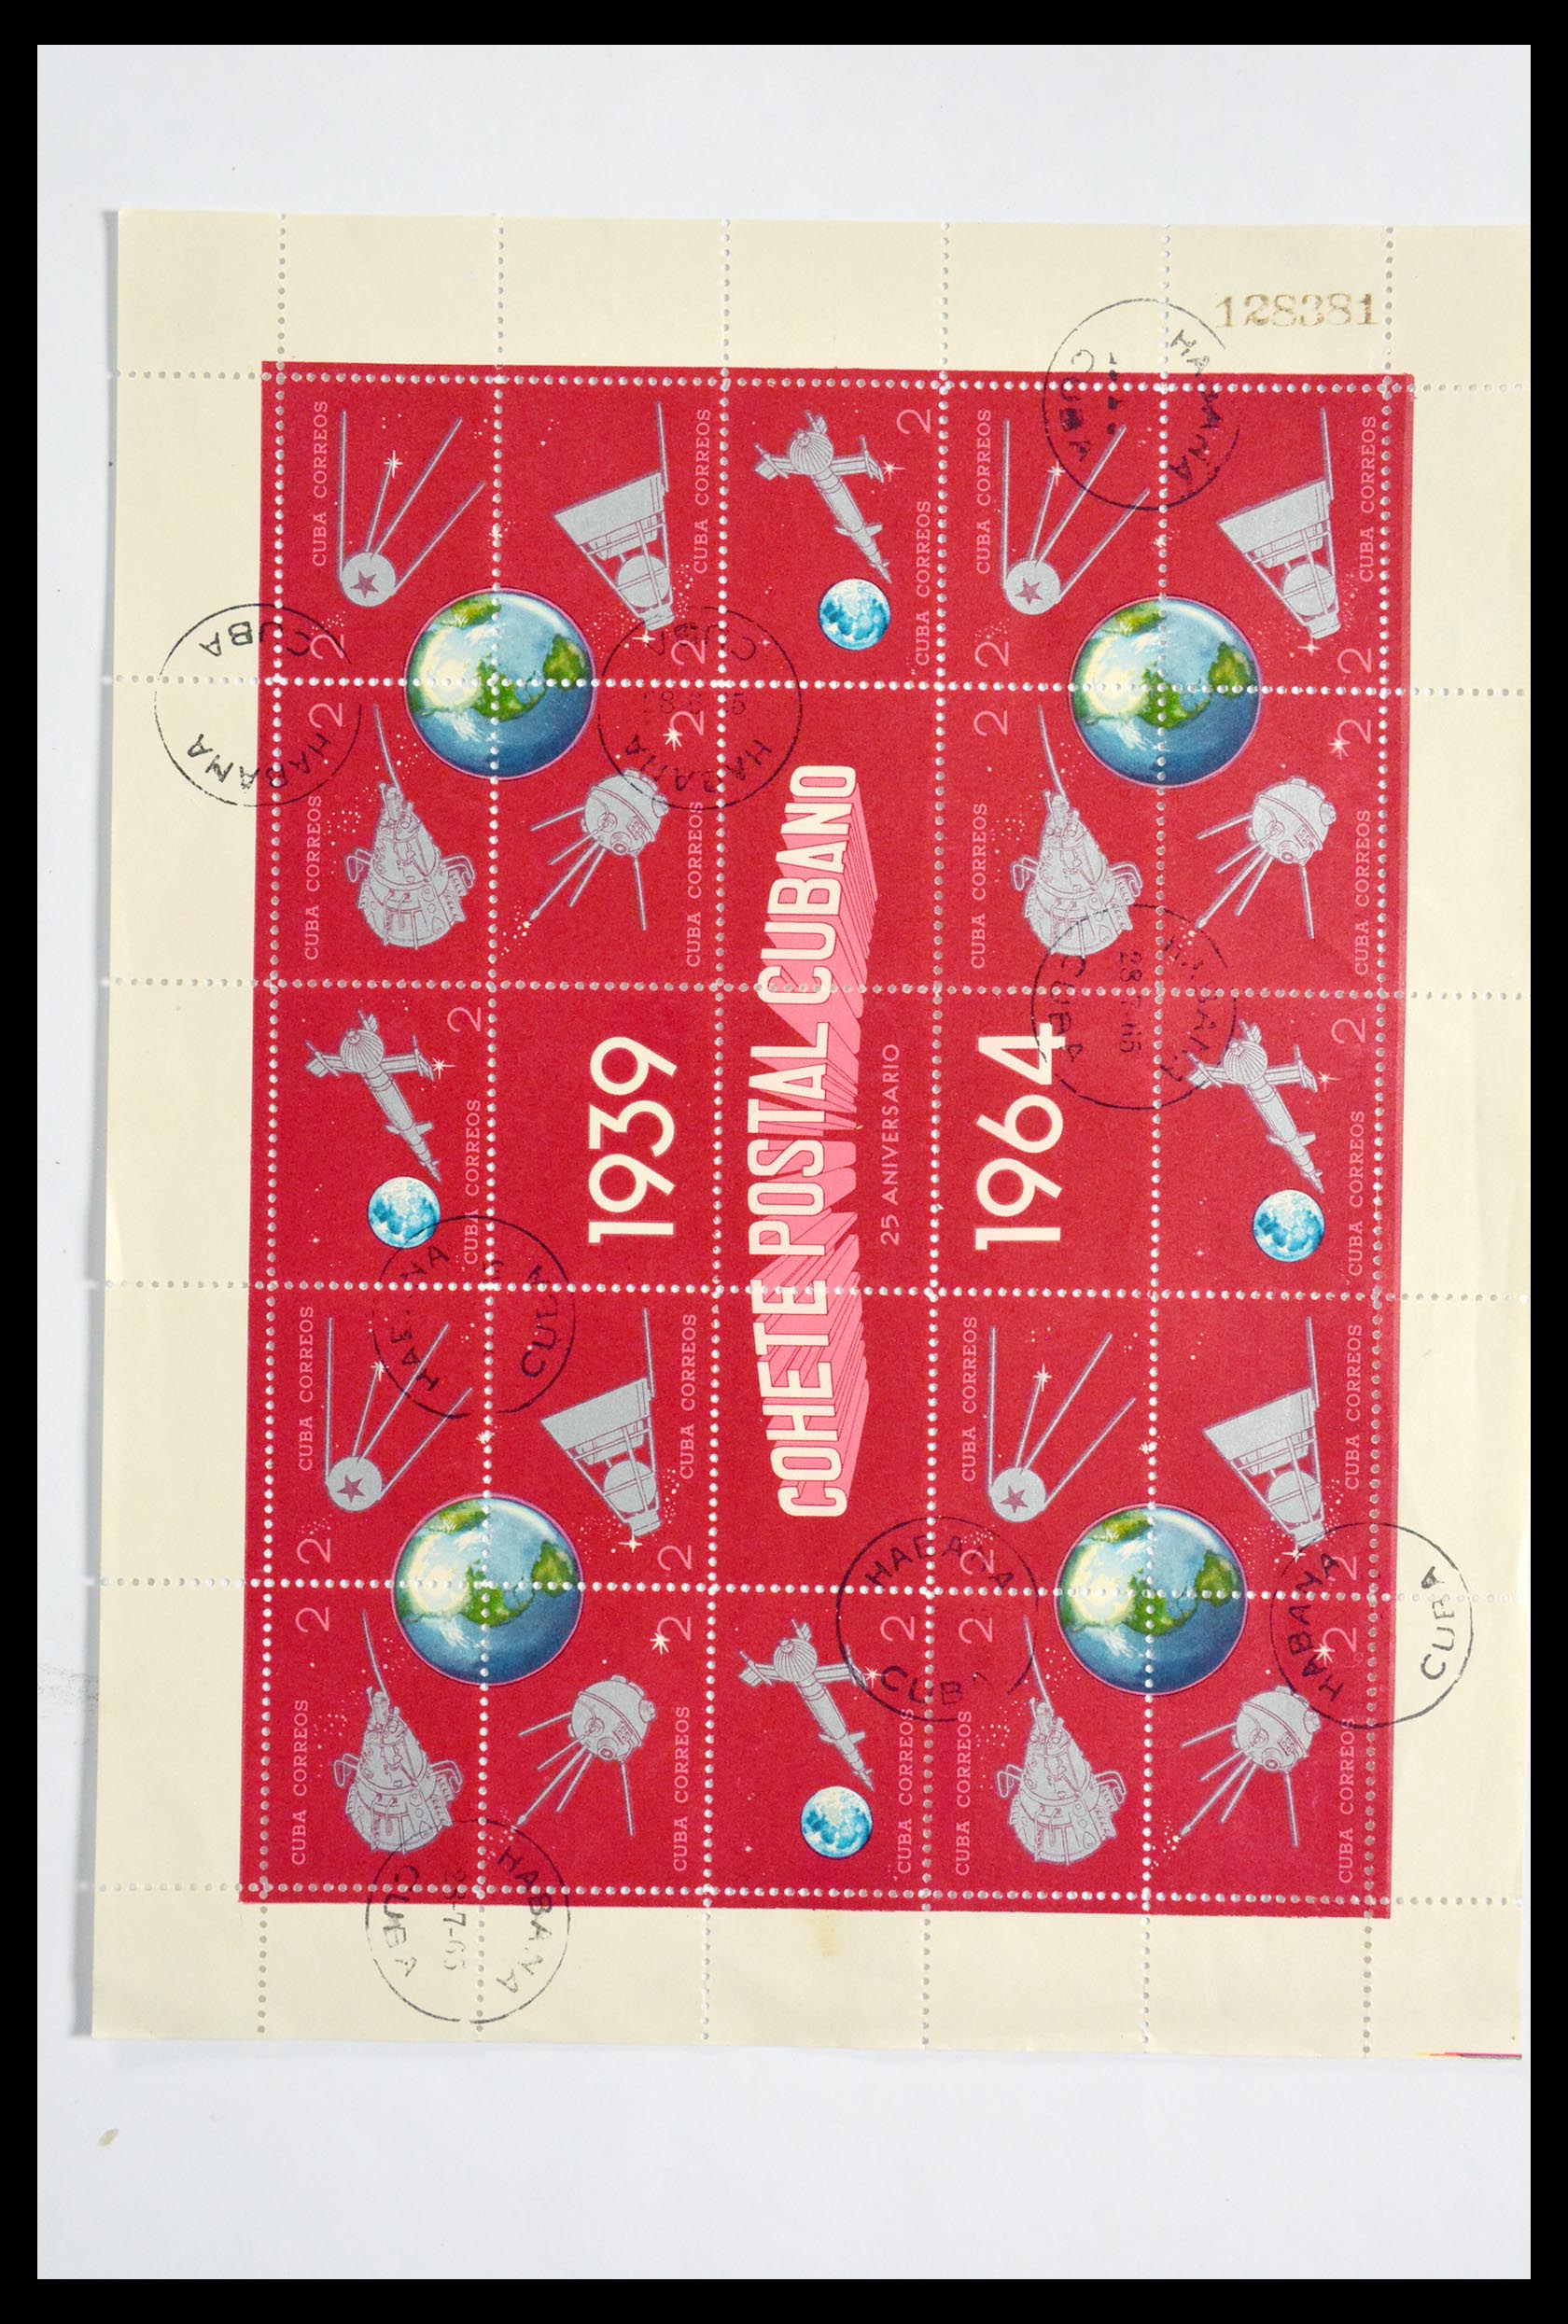 29917 072 - 29917 Latin America airmail stamps.